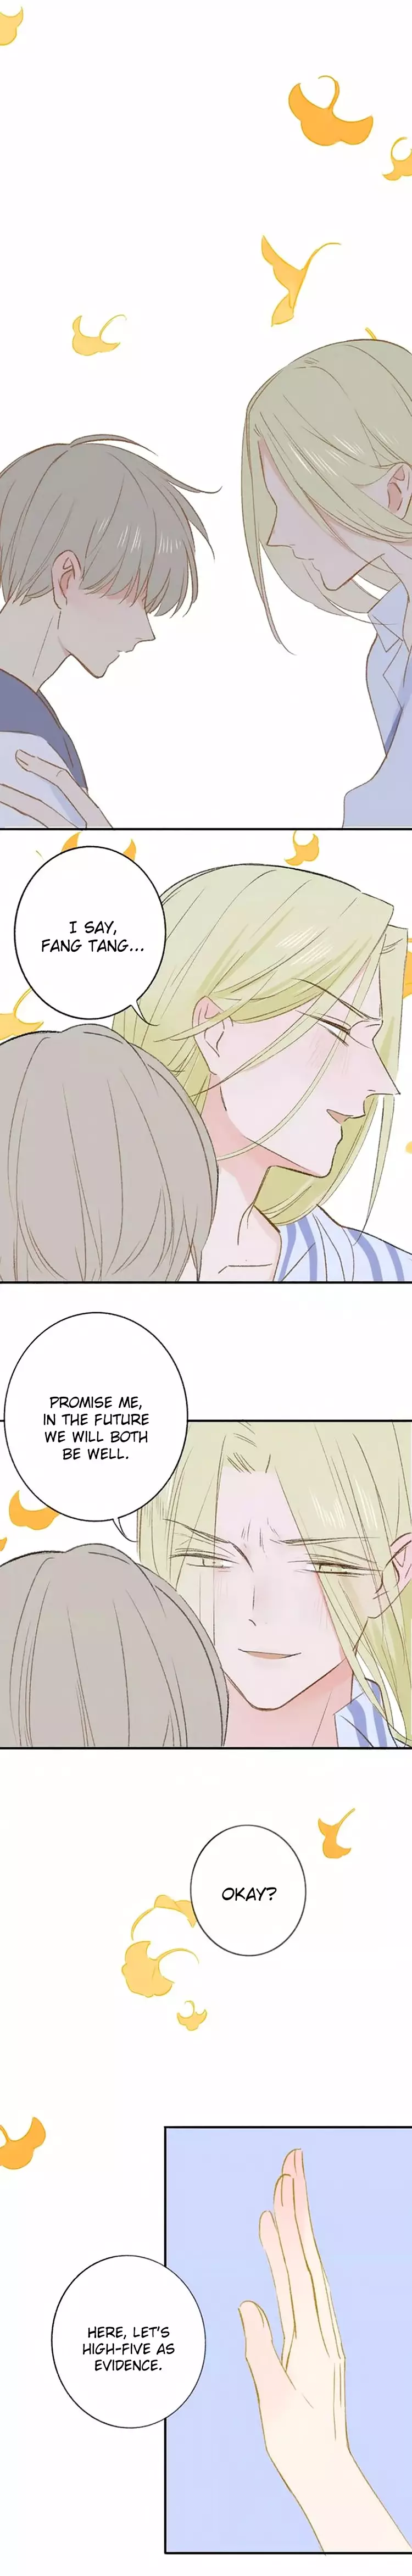 Classmate Relationship? - 116 page 14-8f1ef69f